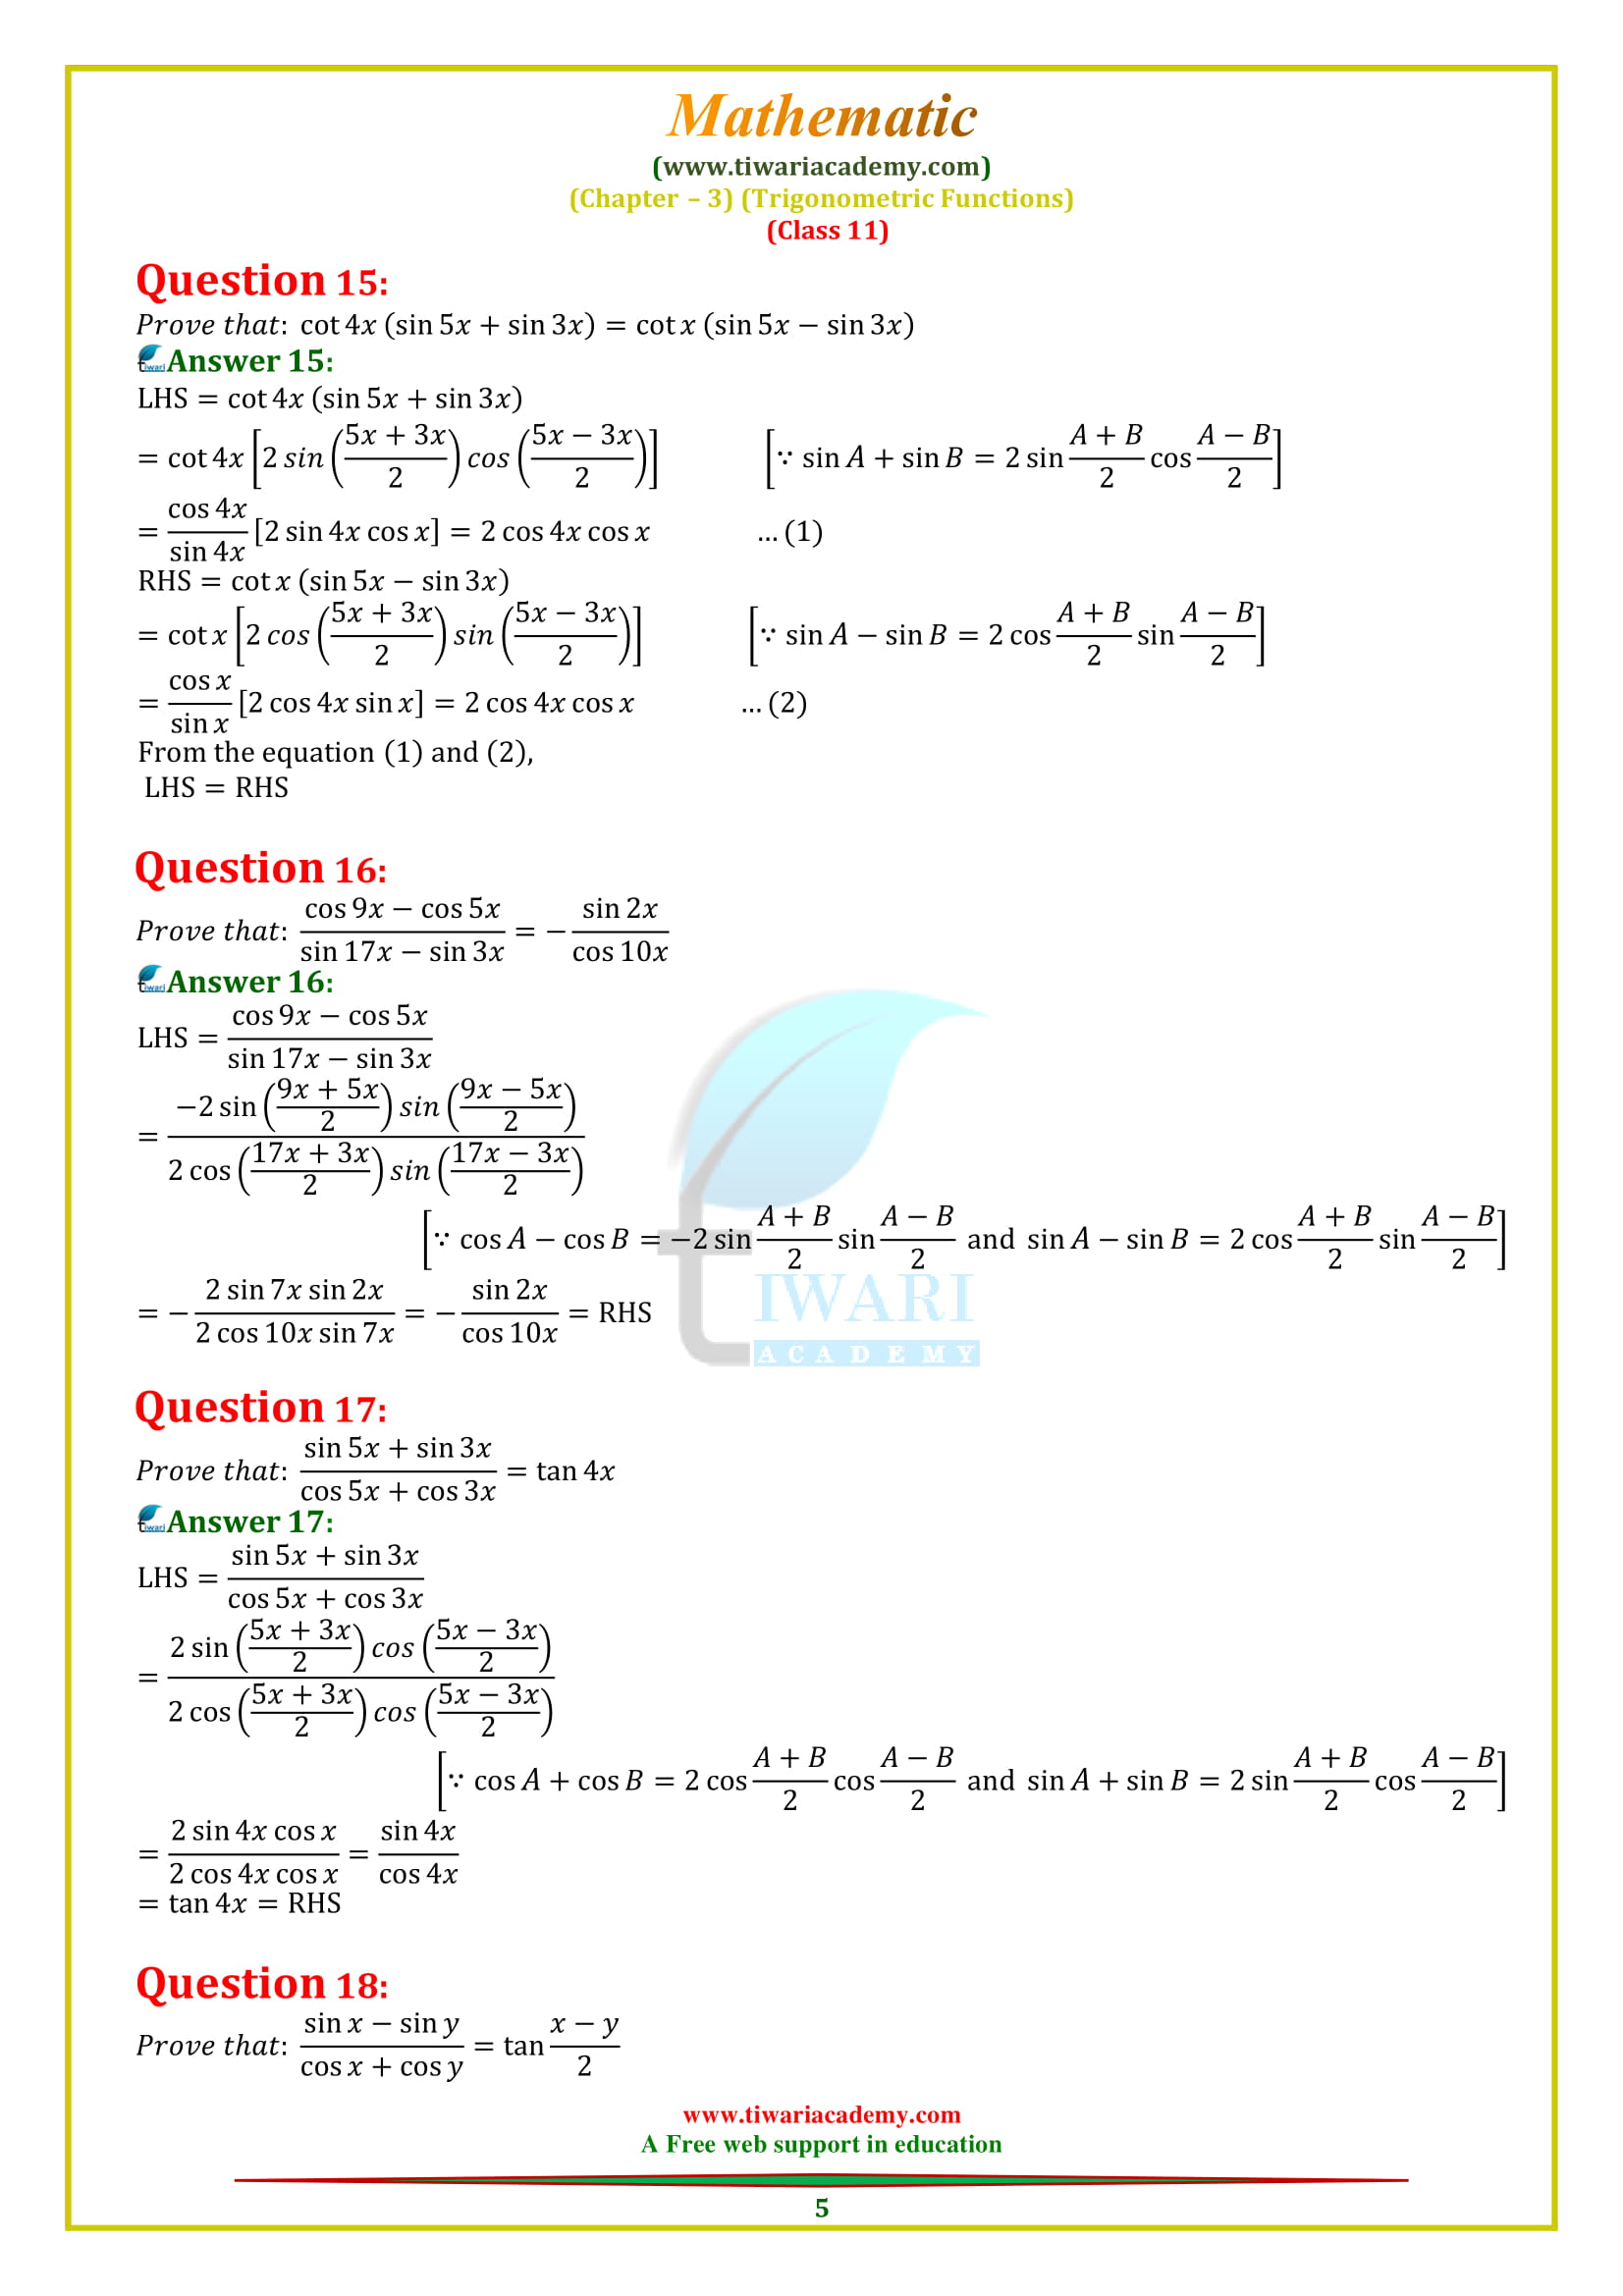 11 Maths Chapter 3 Exercise 3.3 solutions question 8, 9, 10, 11, 12, 13, 14.